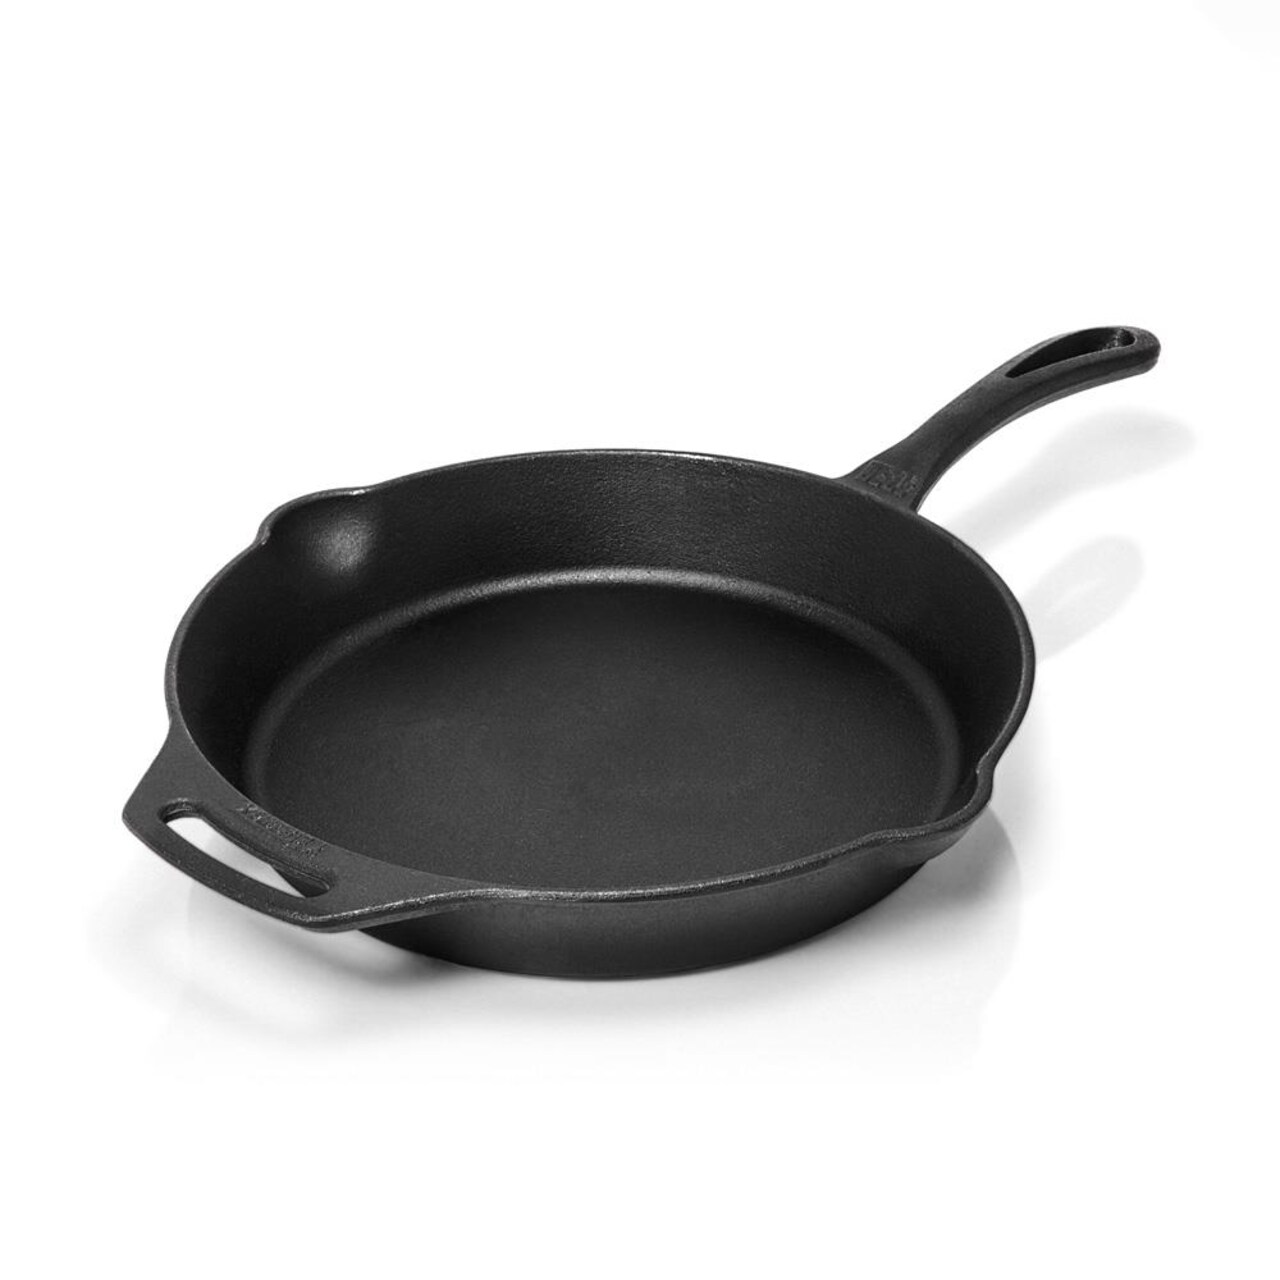 Petromax Cast Iron Fire Skillet for Kitchen or Camping, Pre-Seasoned  Cookware for Campfire or Home Oven and Stove, Conducts Heat Evenly, Long  Handle